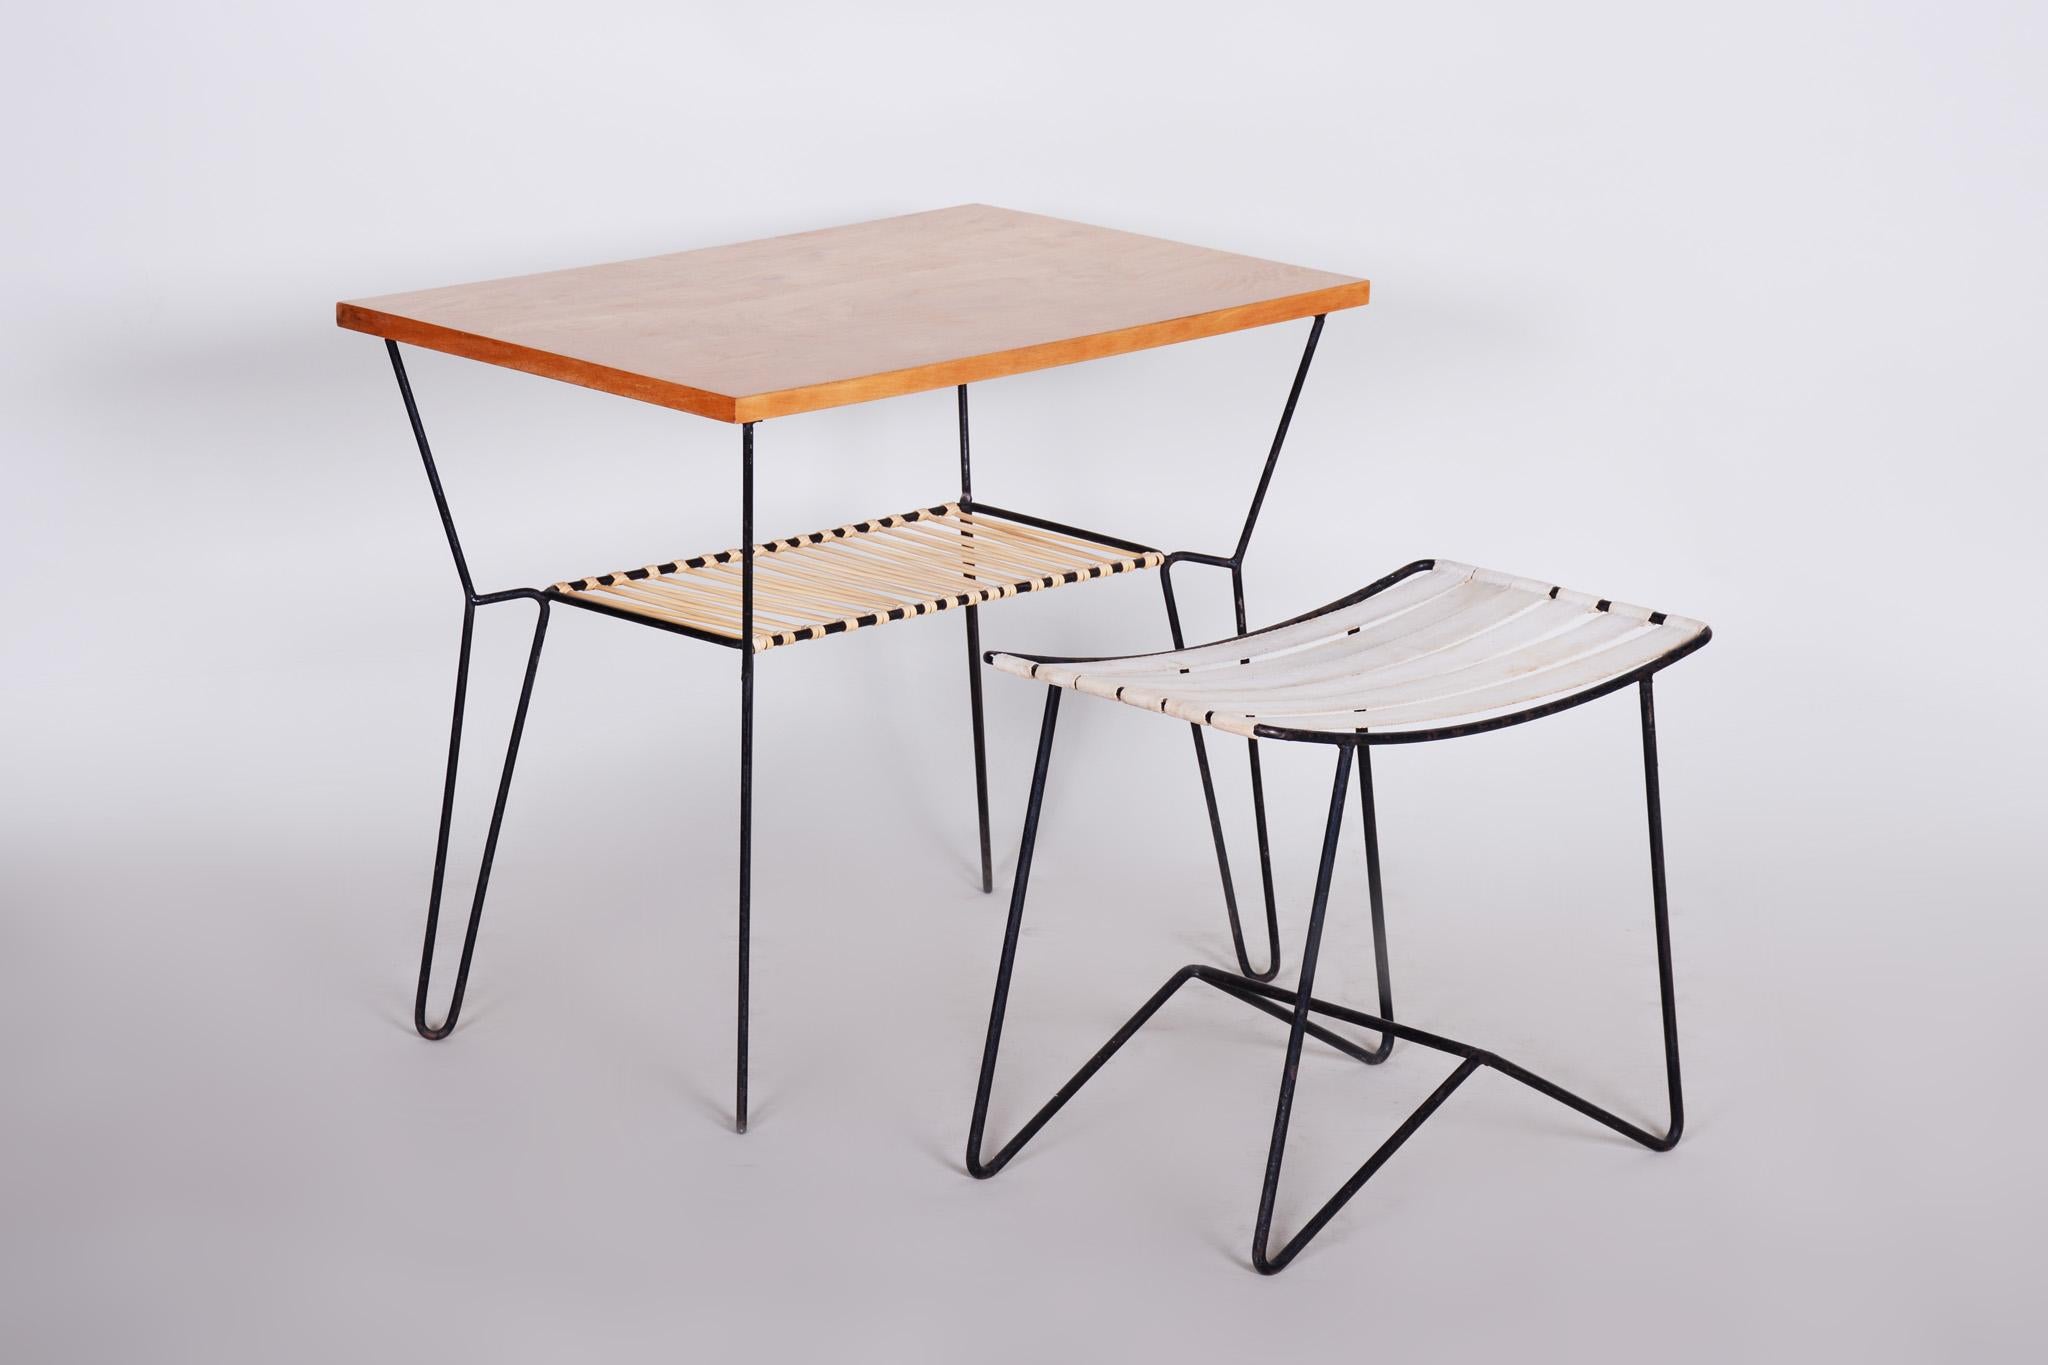 20th Century Set of Midcentury Orange Stool and Beech Table, Preserved Condition, 1950s For Sale